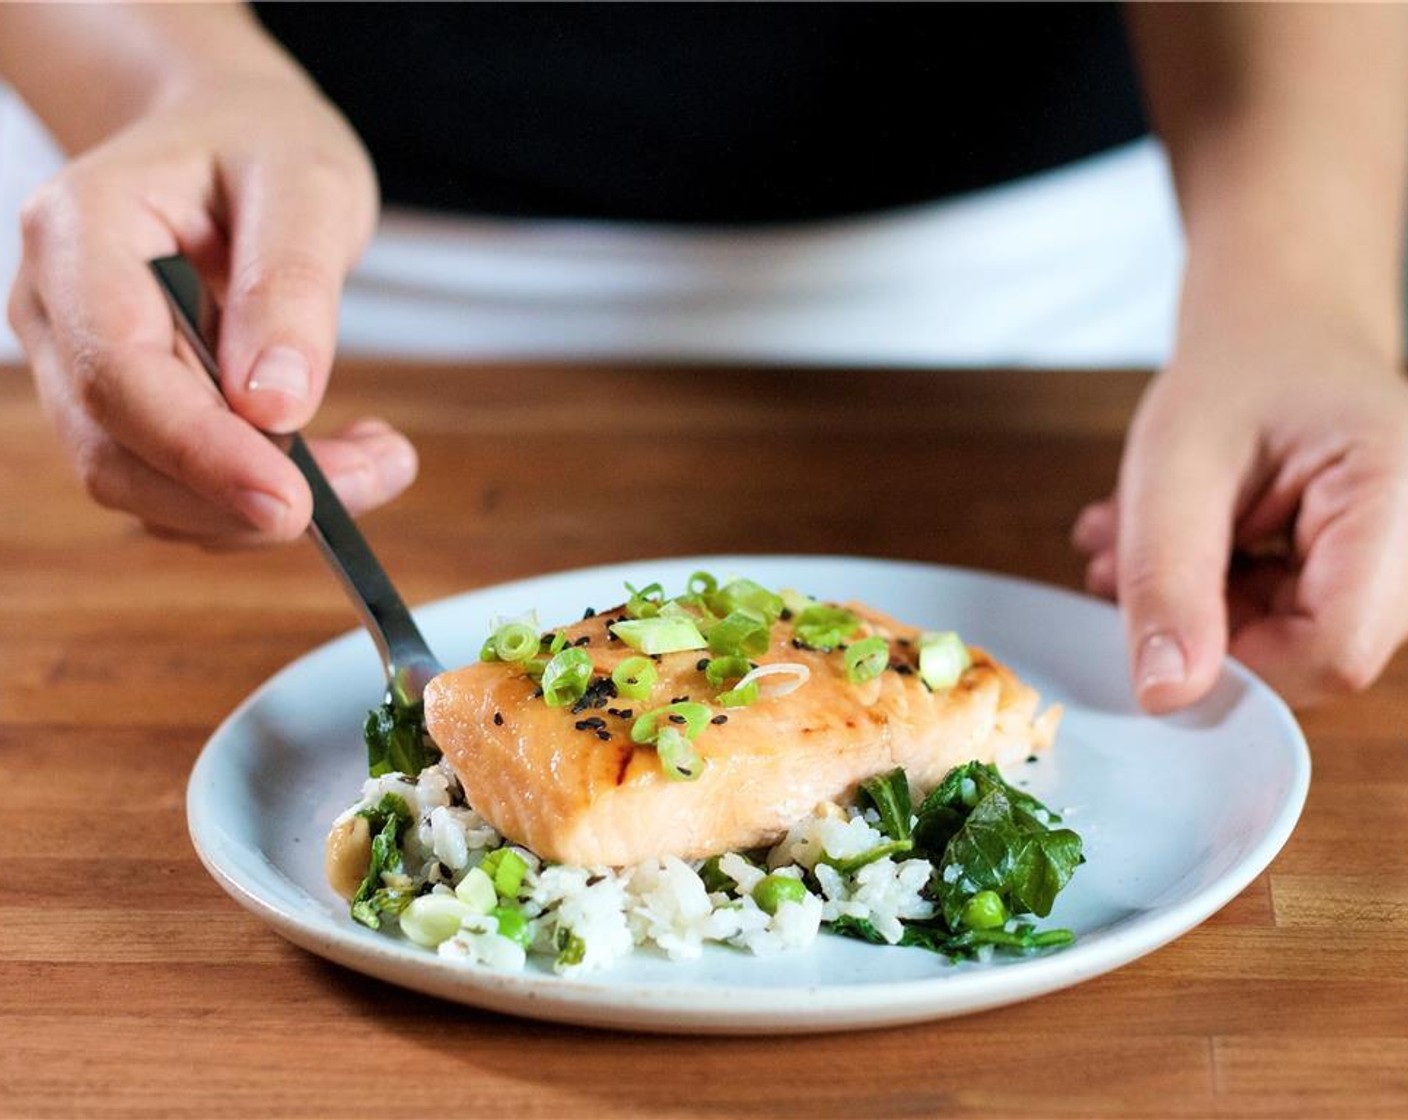 step 12 Place the coconut basmati rice in the center of two plates. Place the salmon directly on top of the rice. Garnish by squeezing fresh lime juice over each plate, sprinkle with green onions and Black Sesame Seeds (1 tsp).